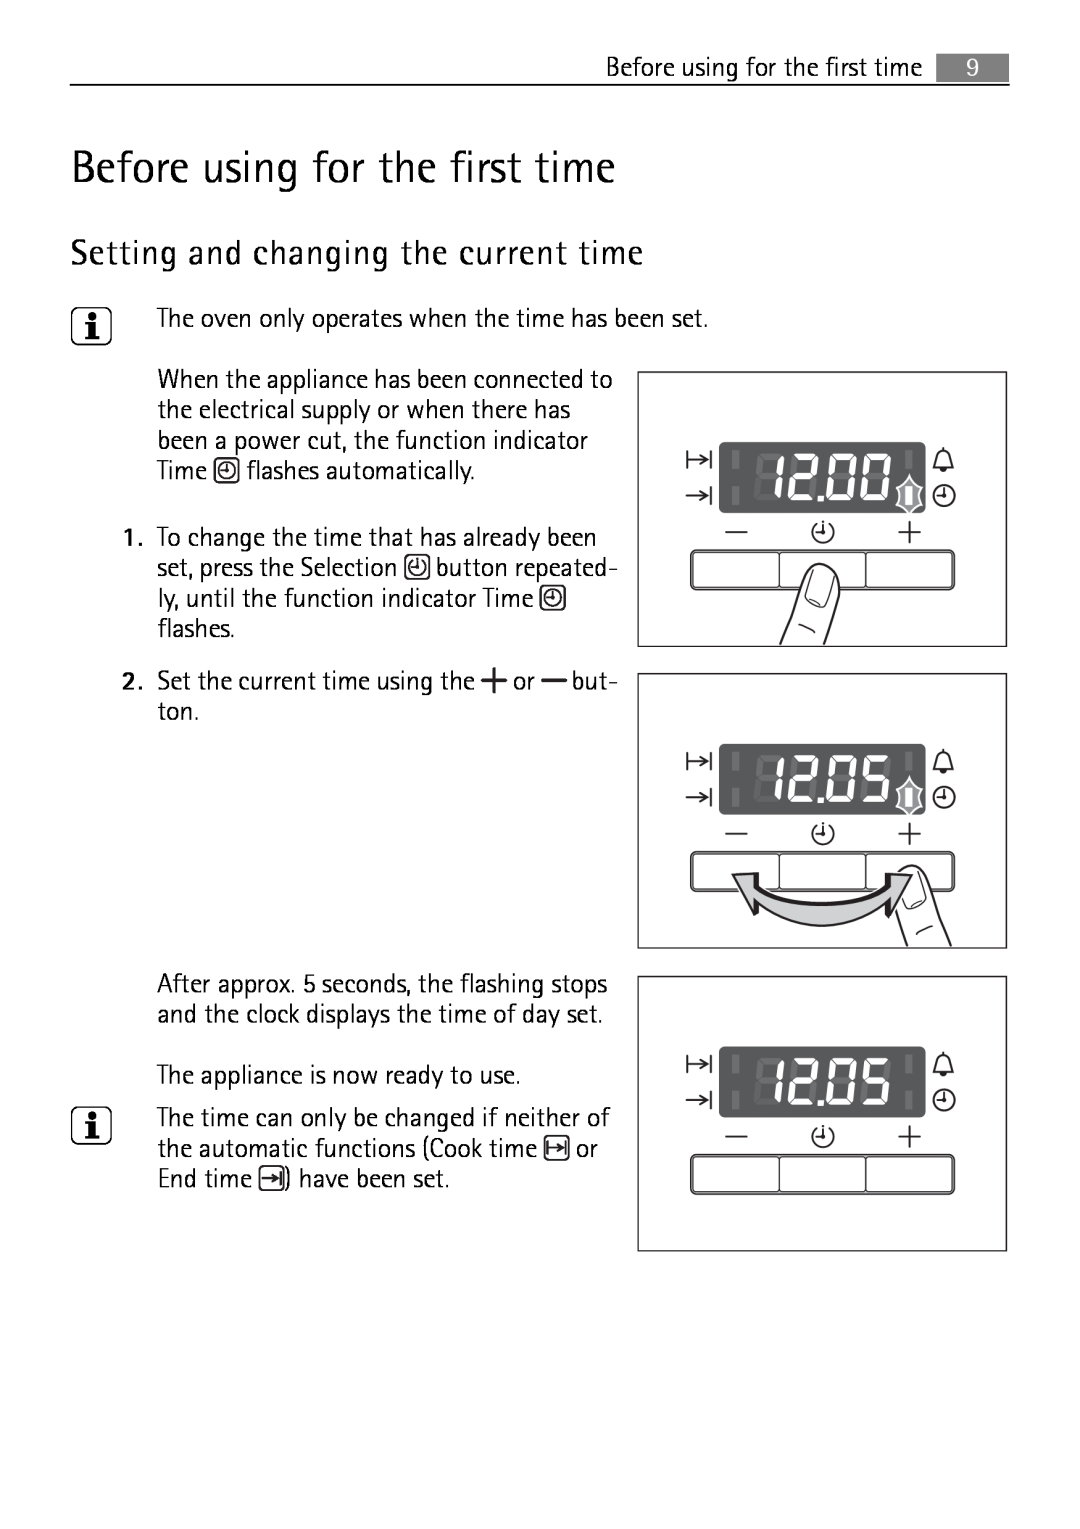 Electrolux B2100-5 user manual Before using for the first time, Setting and changing the current time 